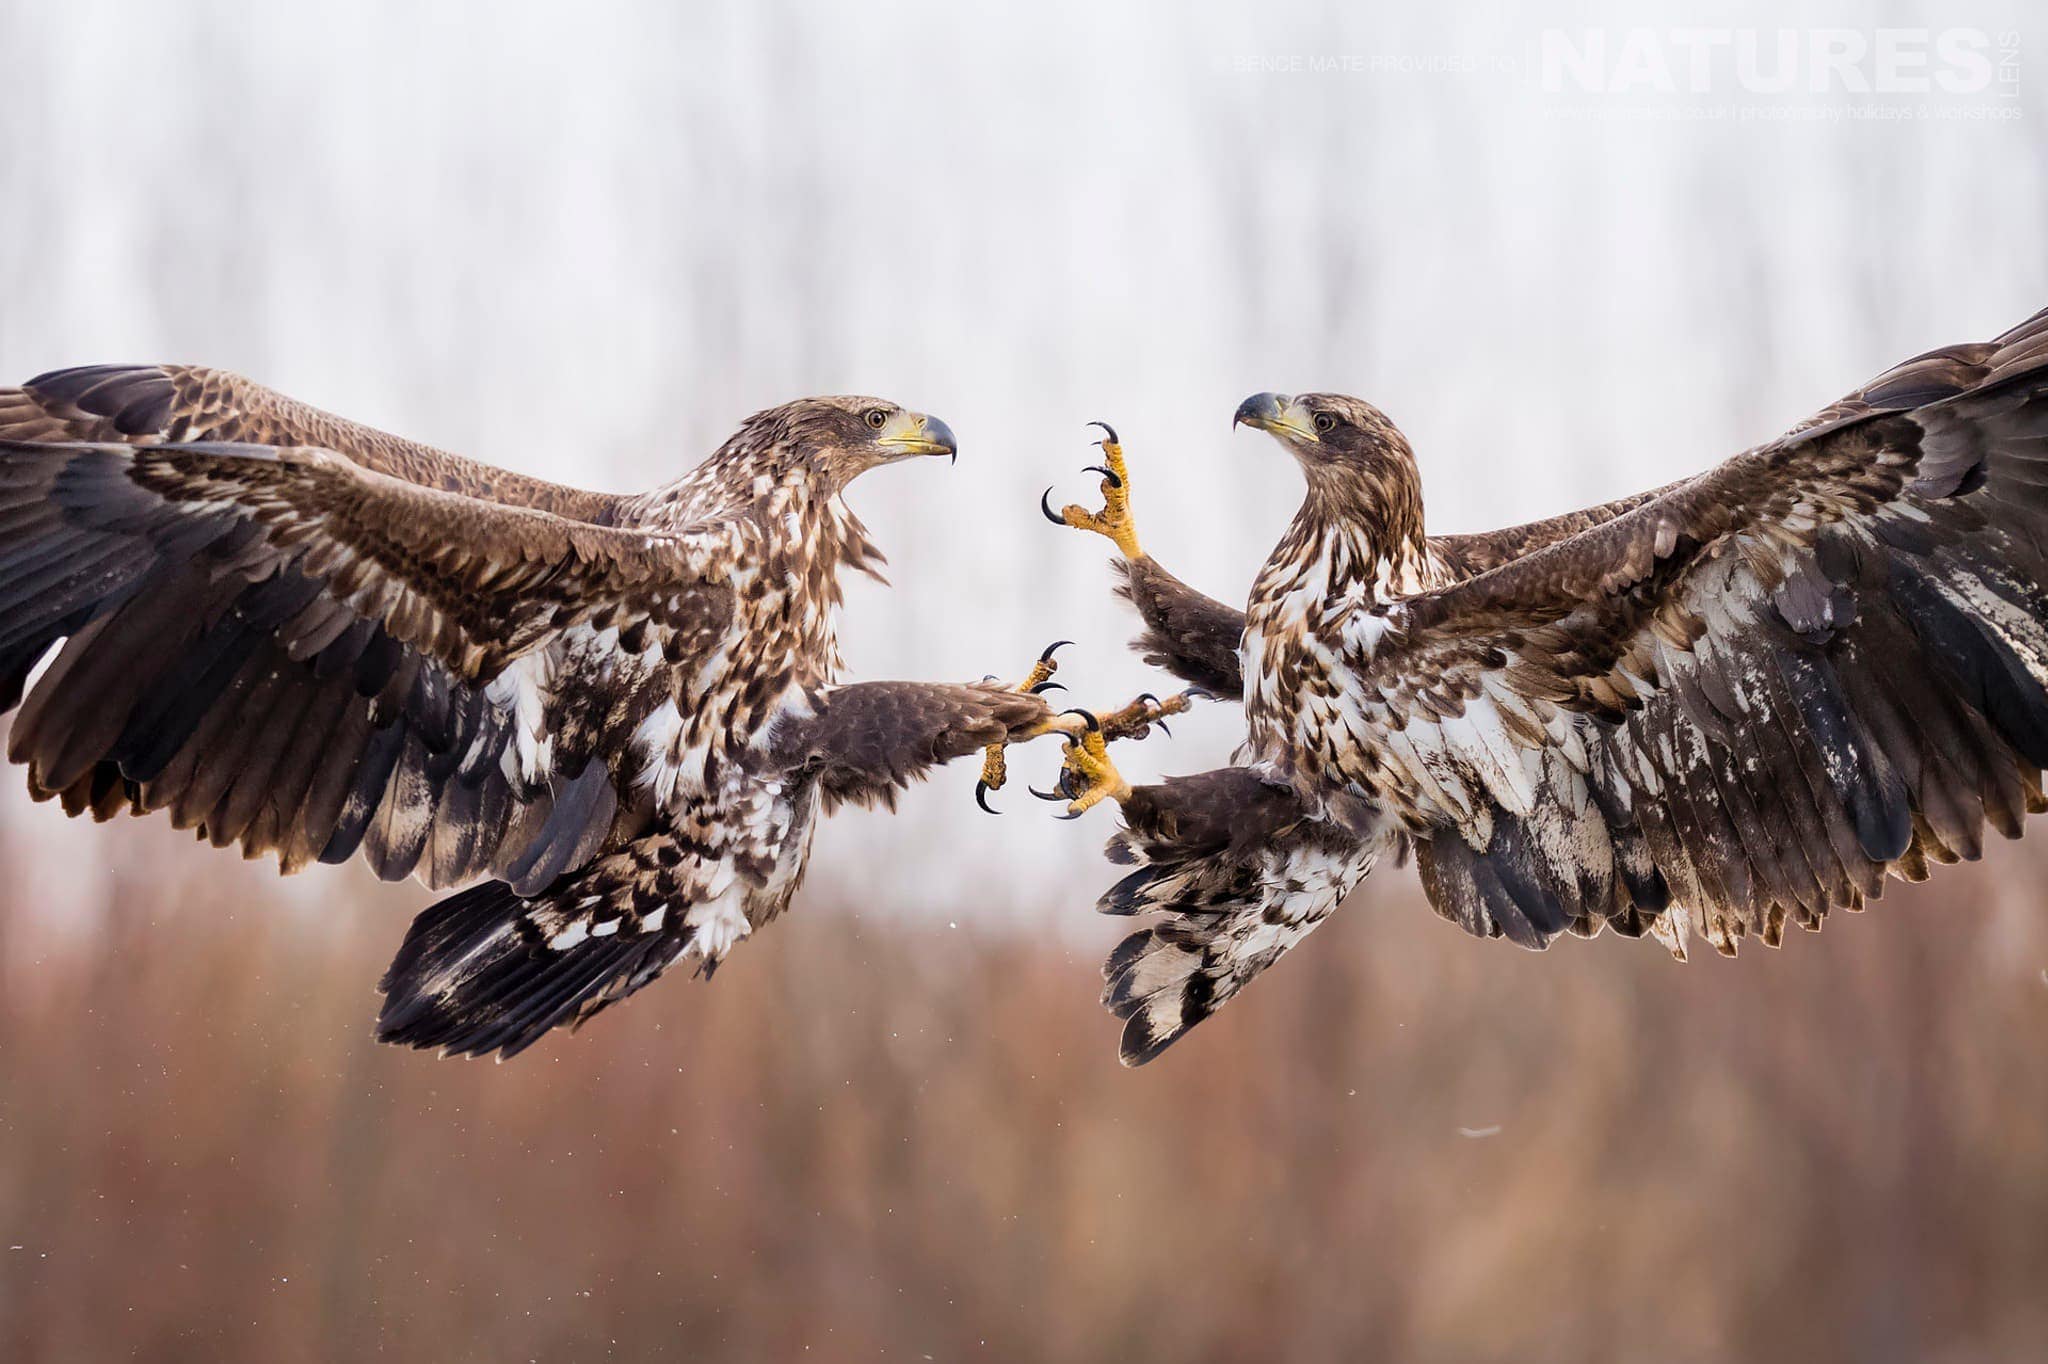 Fighting Eagles at Bence Máté's Photography Hides during the Hungarian Winter